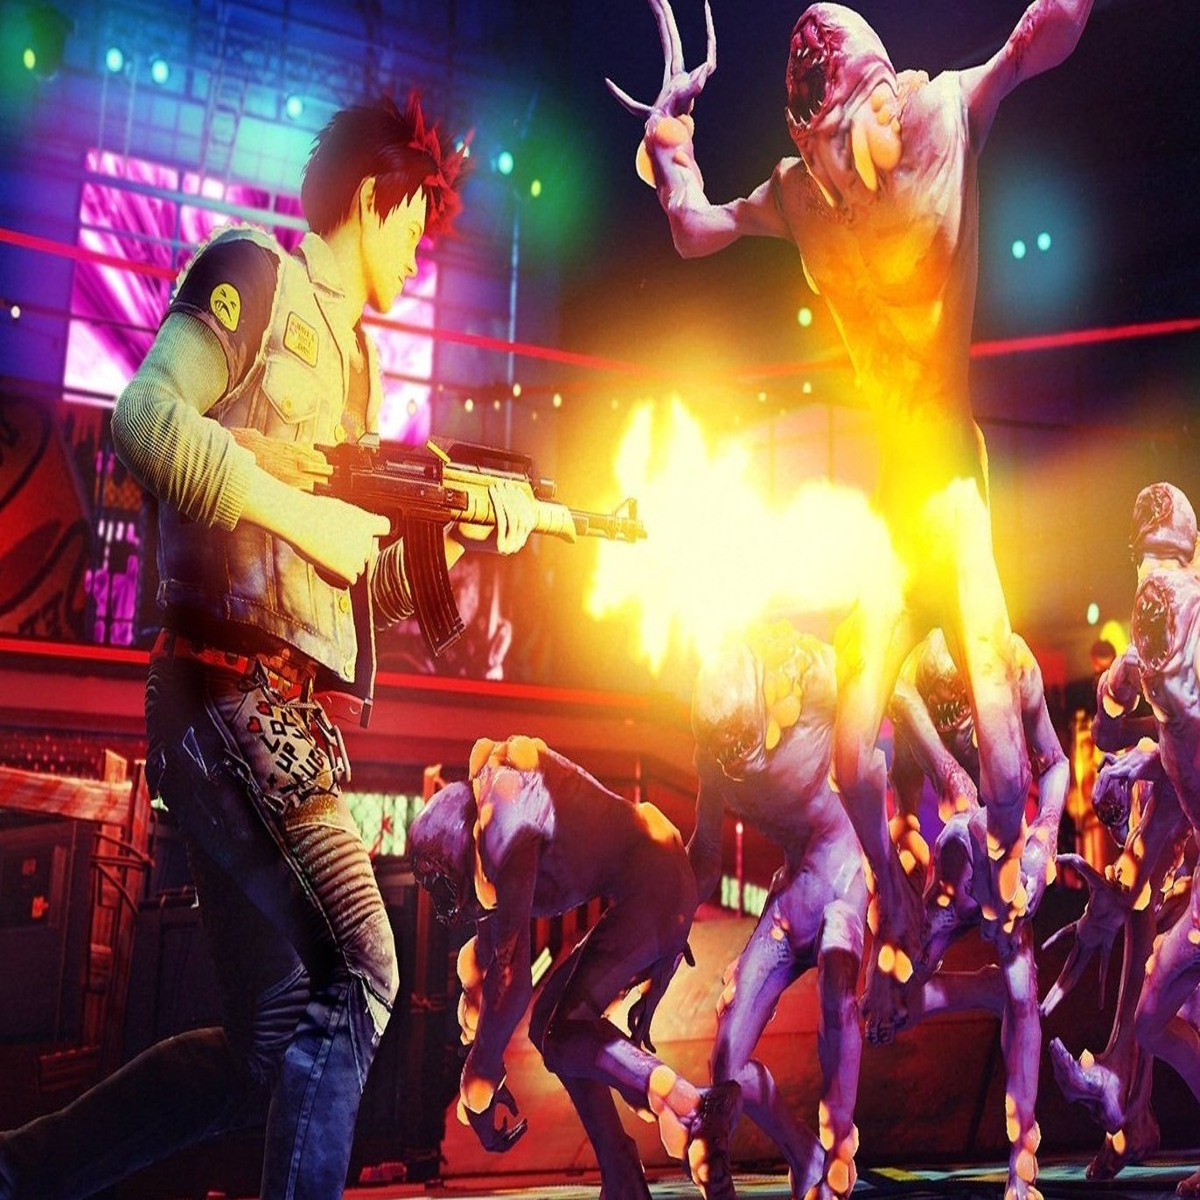 Sunset Overdrive now available for free on Xbox One thanks to